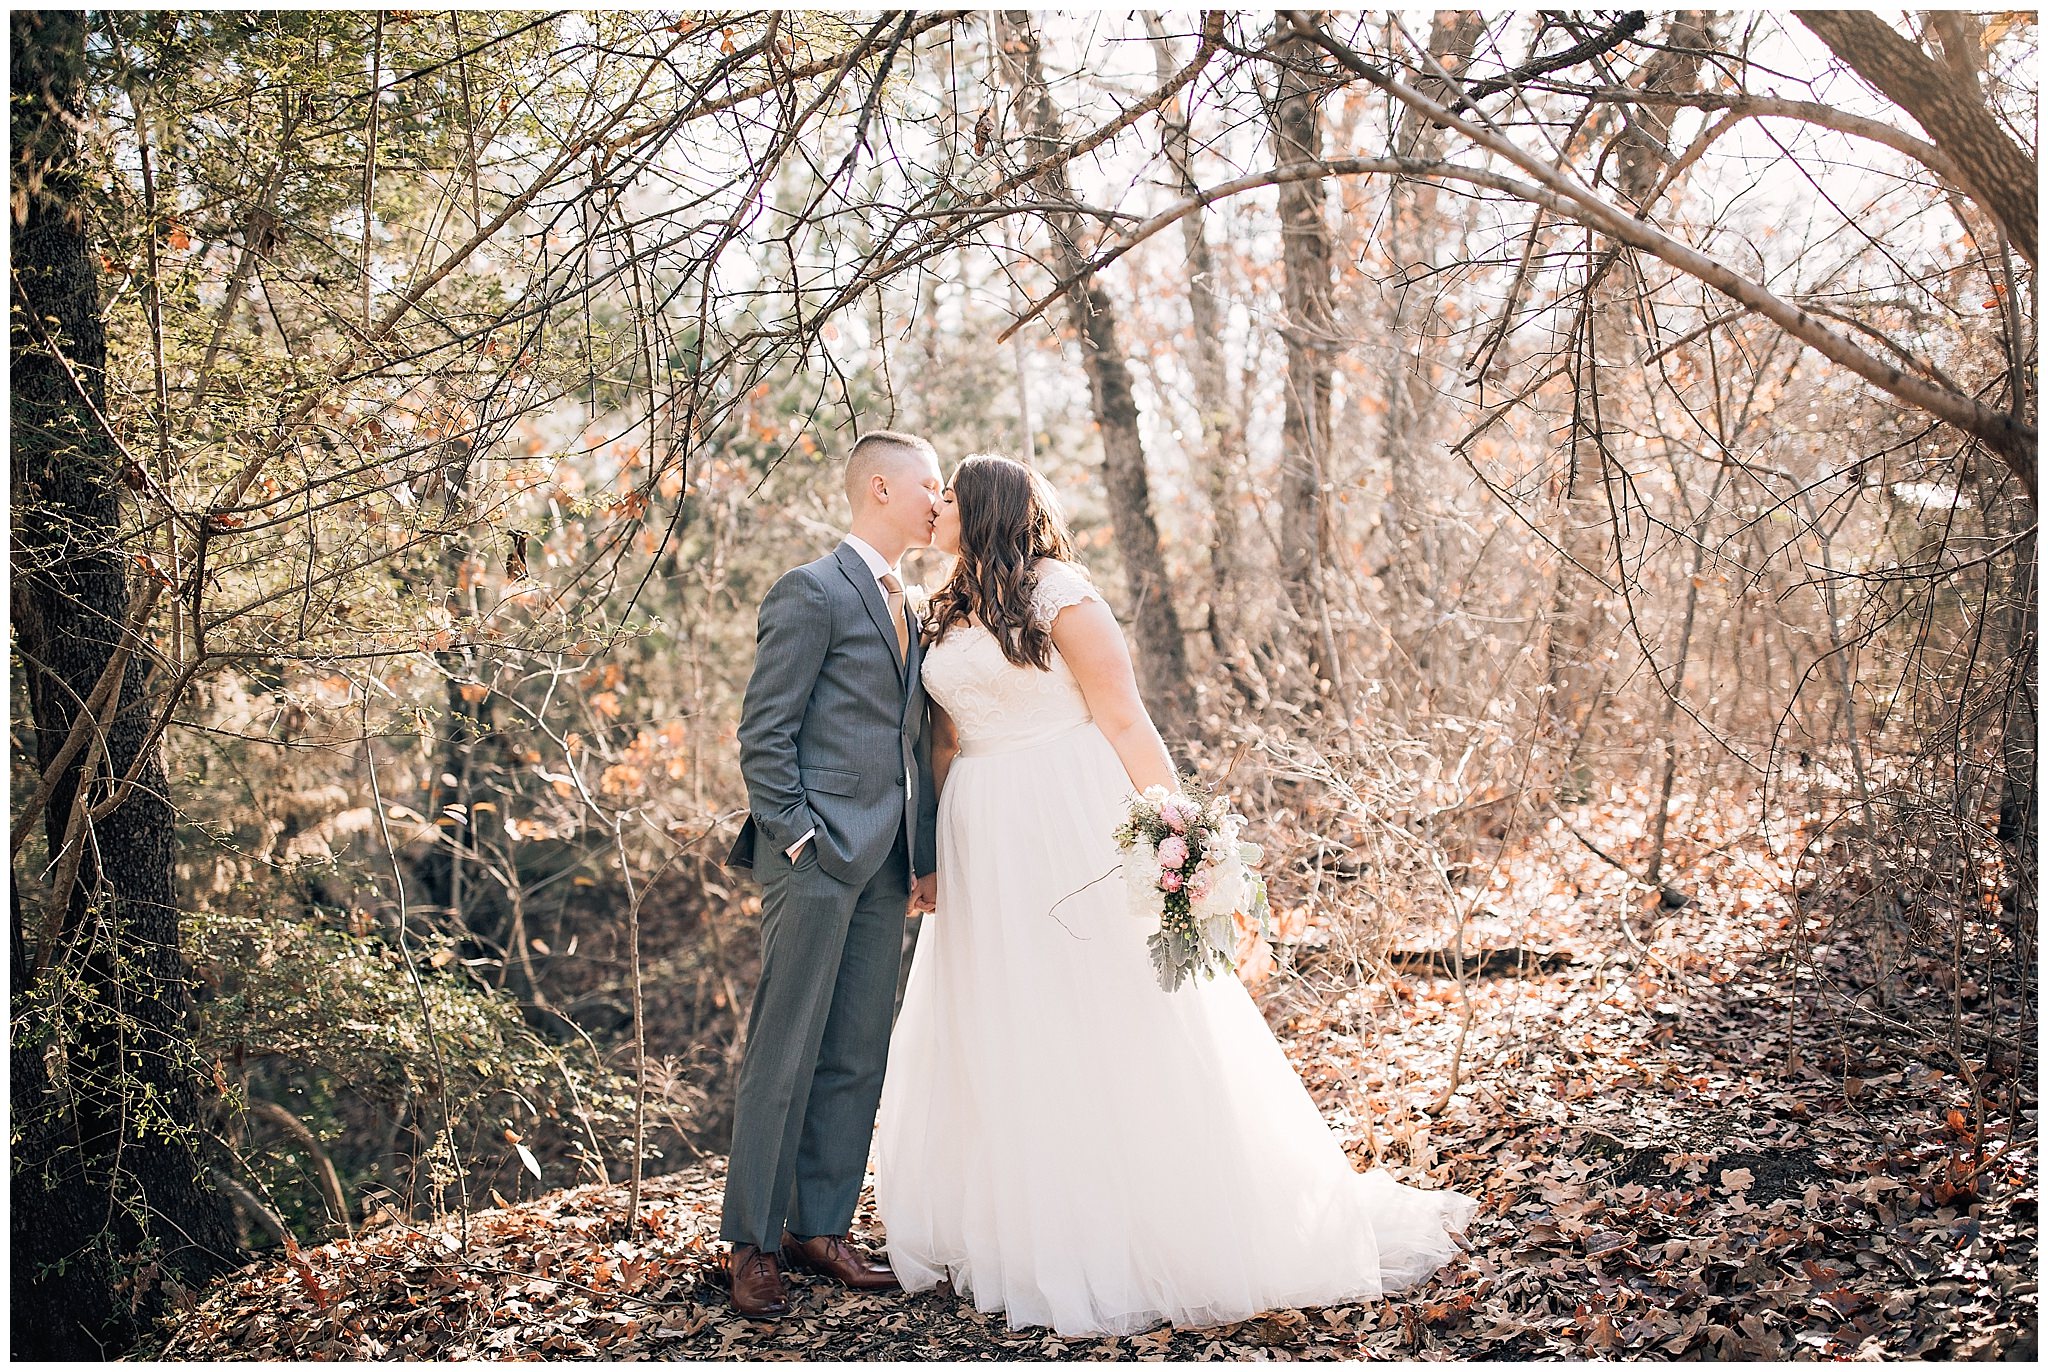 Bride and Groom kissing at their Texas countryside wedding